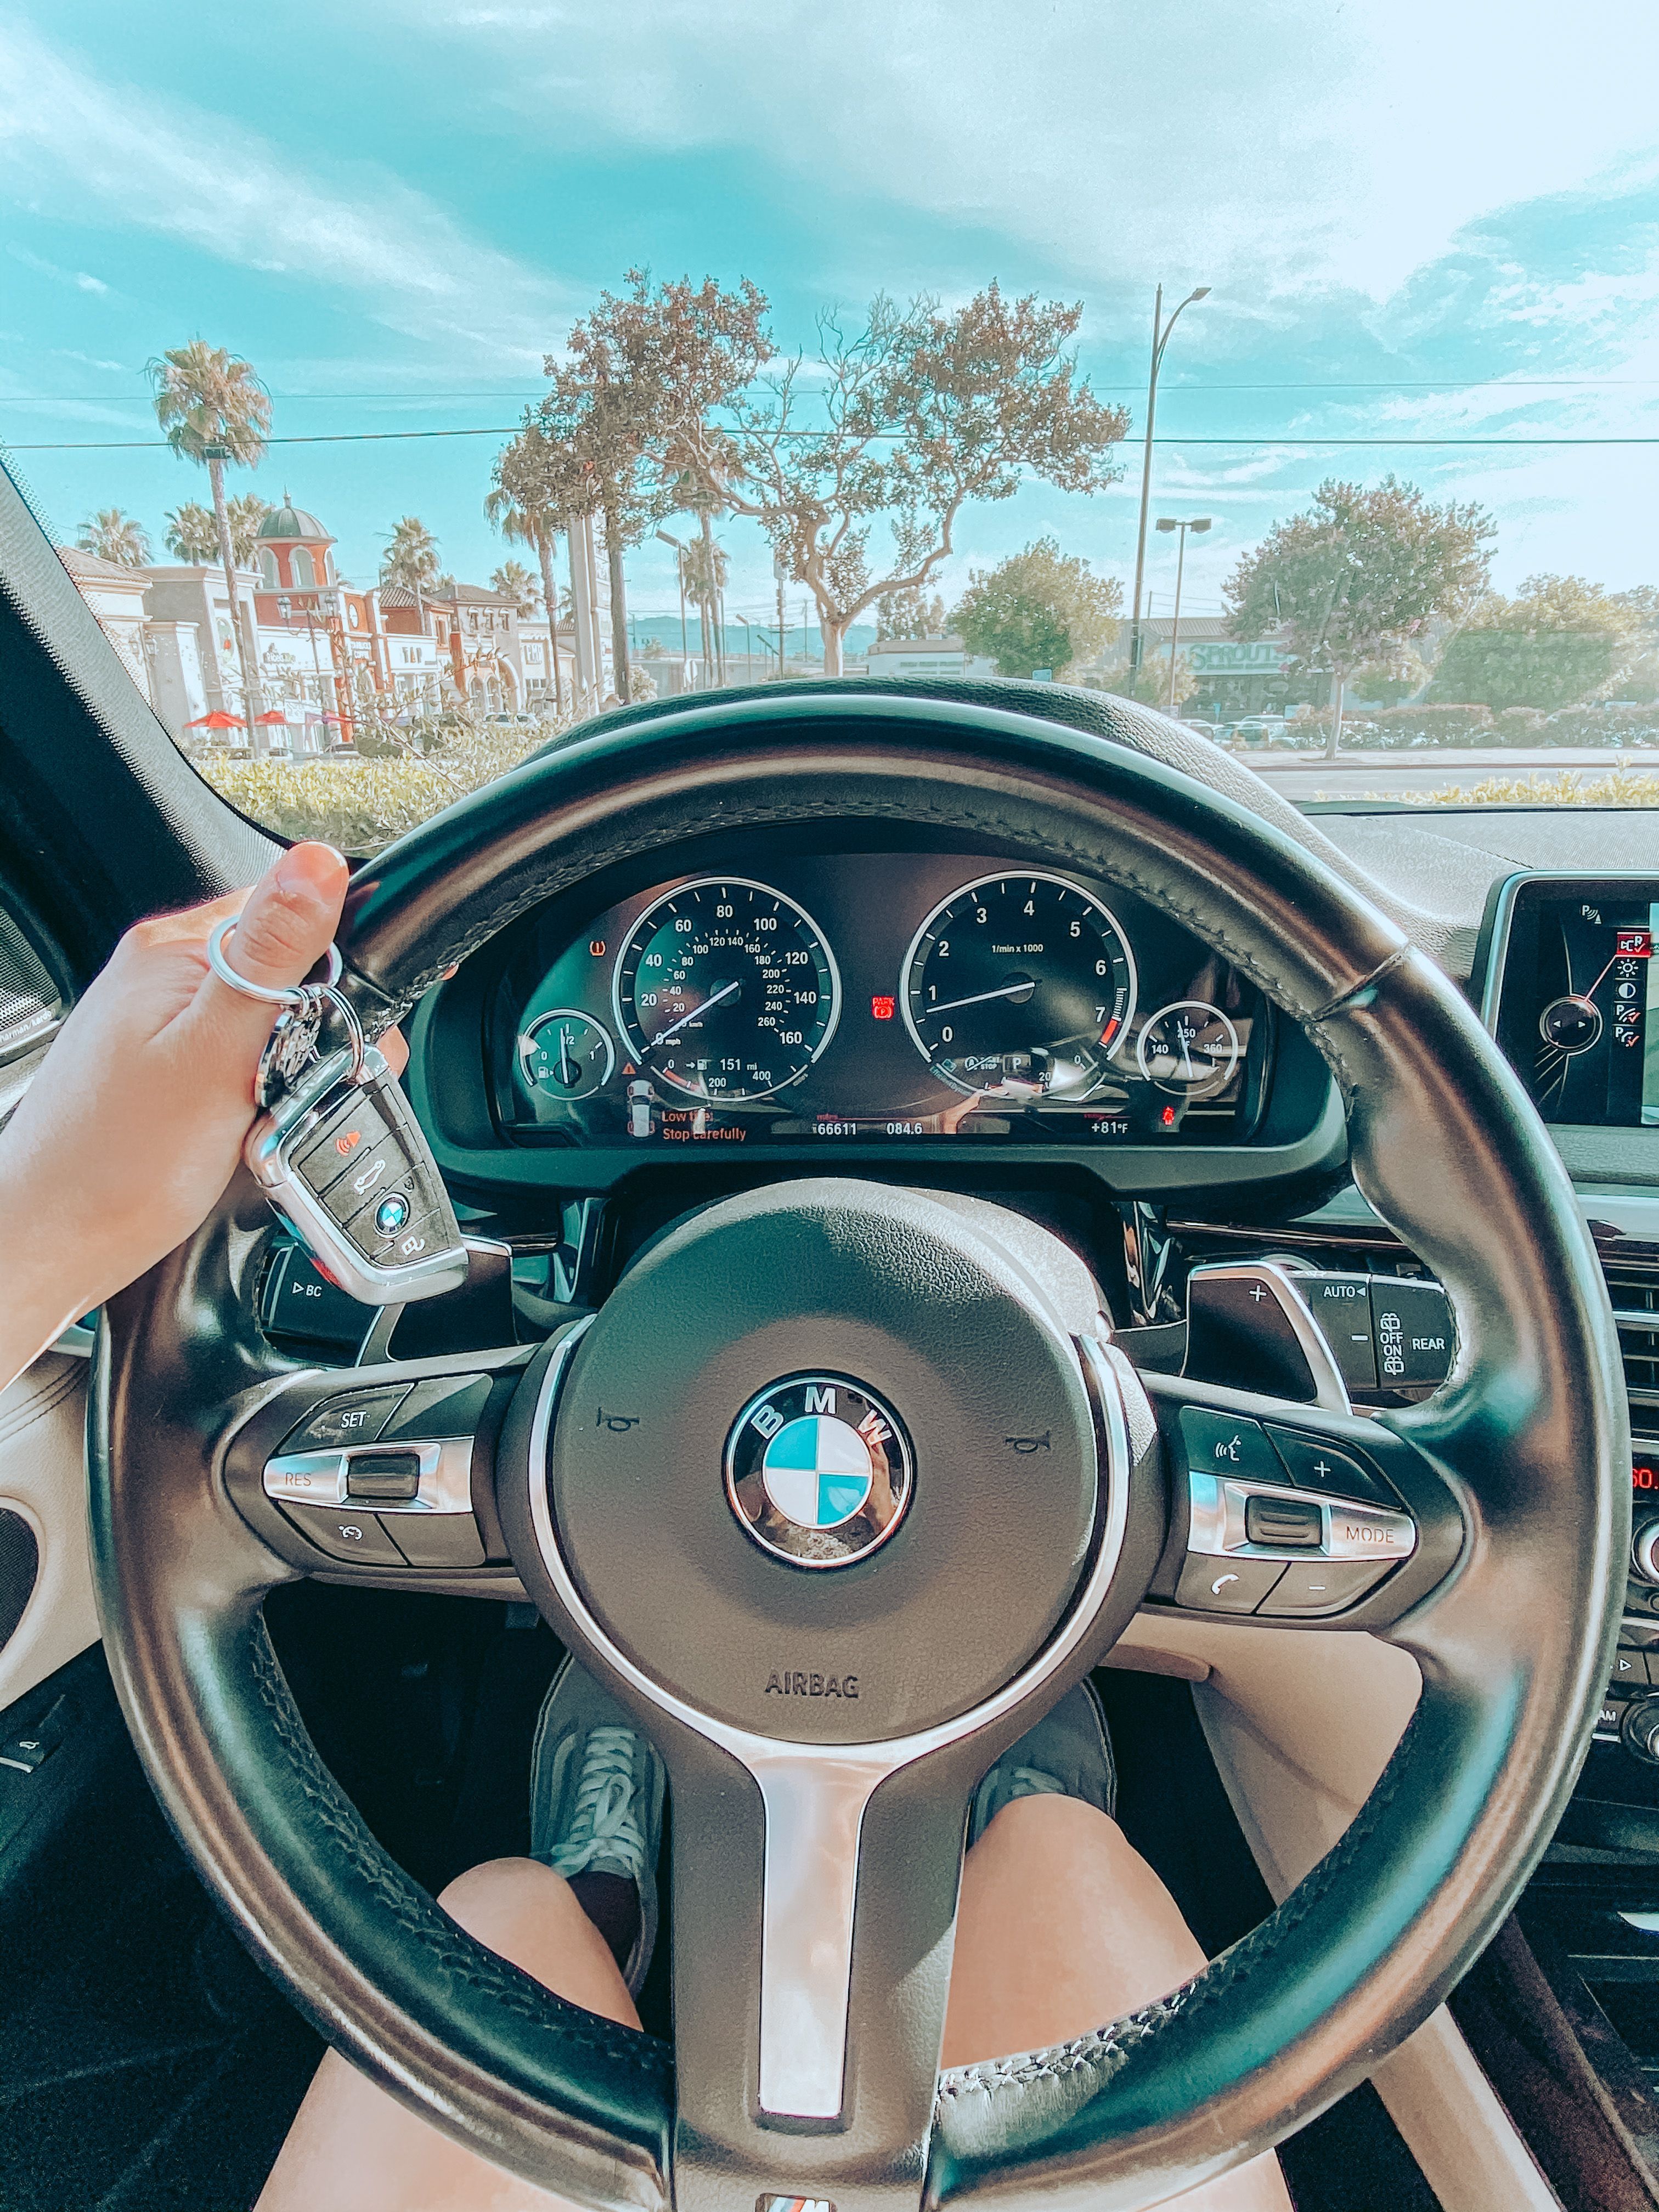 BMW car aesthetic:). New car picture, Bmw, New cars